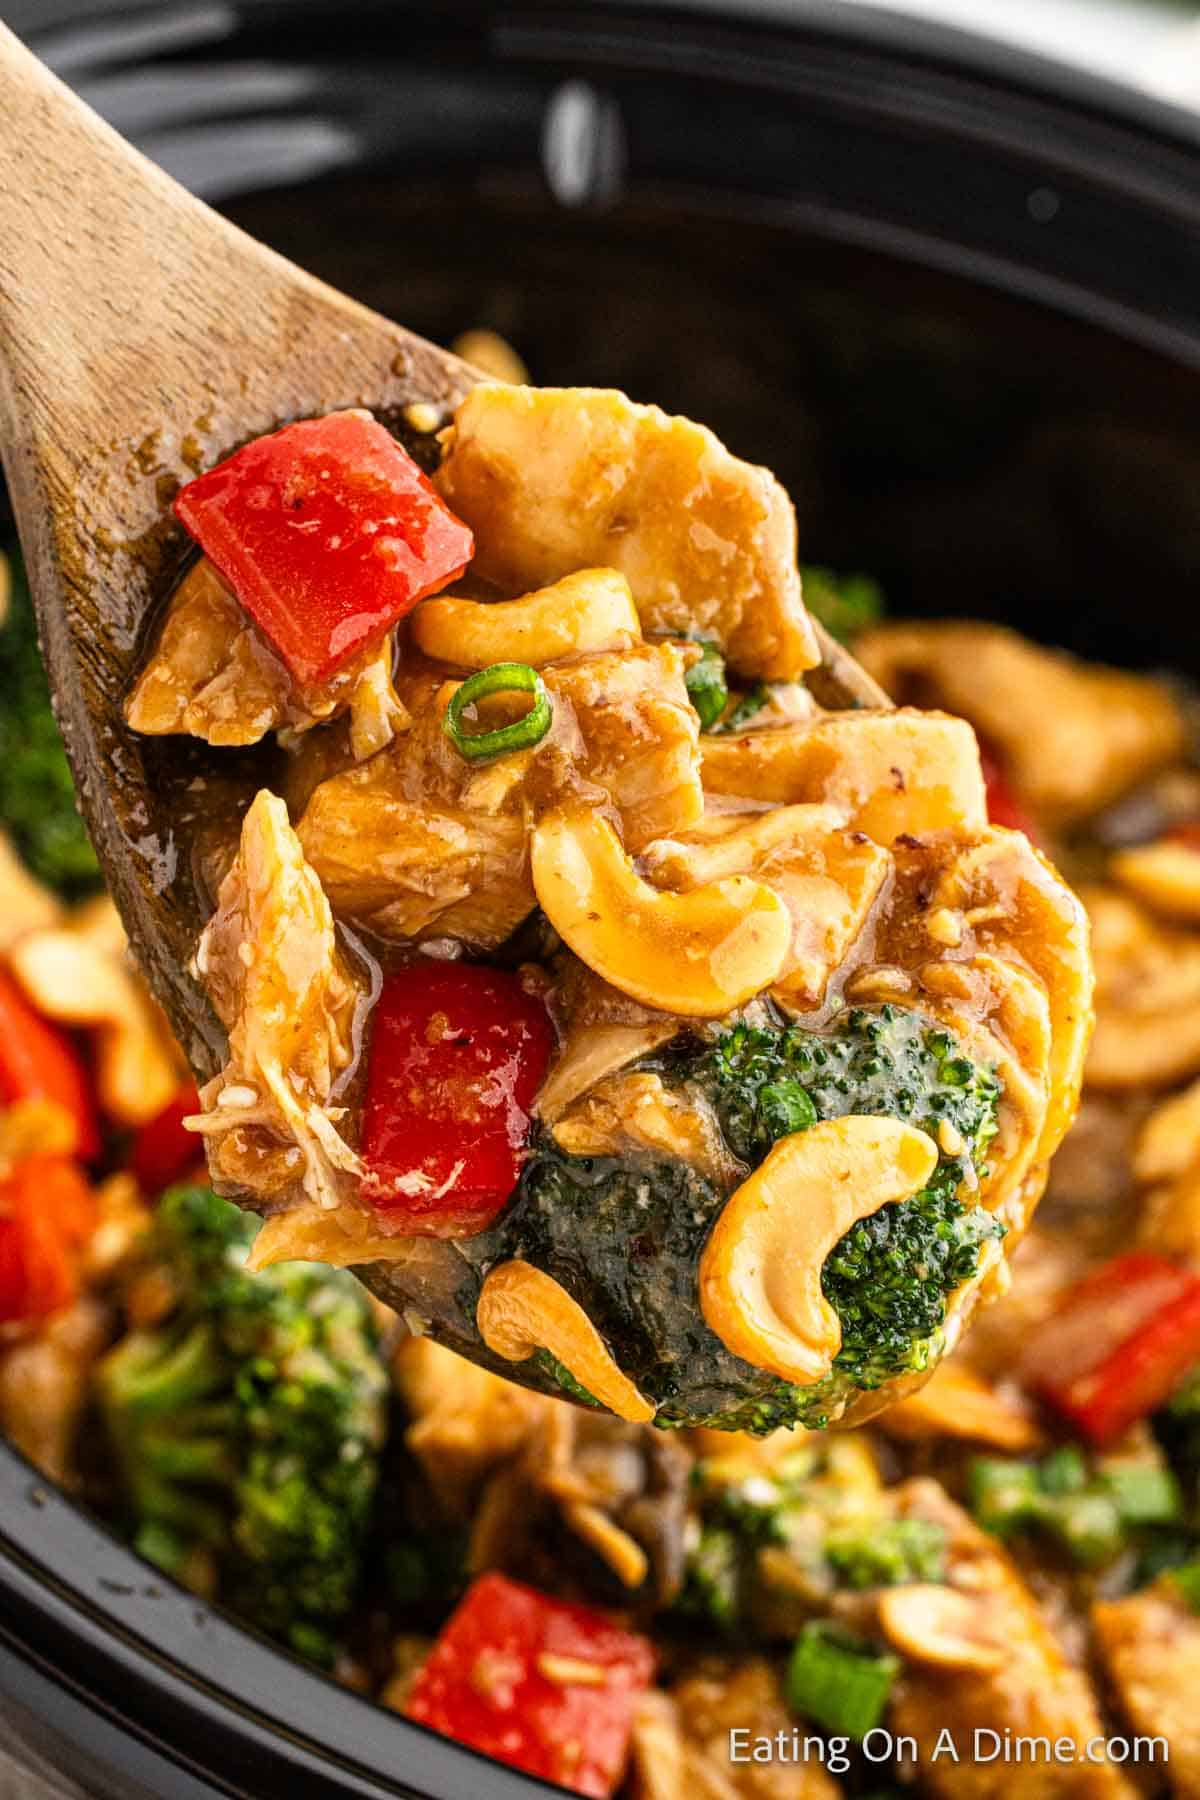 A serving of Cashew chicken with broccoli, cashews and red bell pepper on a wooden spoon with cashew chicken in the background in the slow cooker